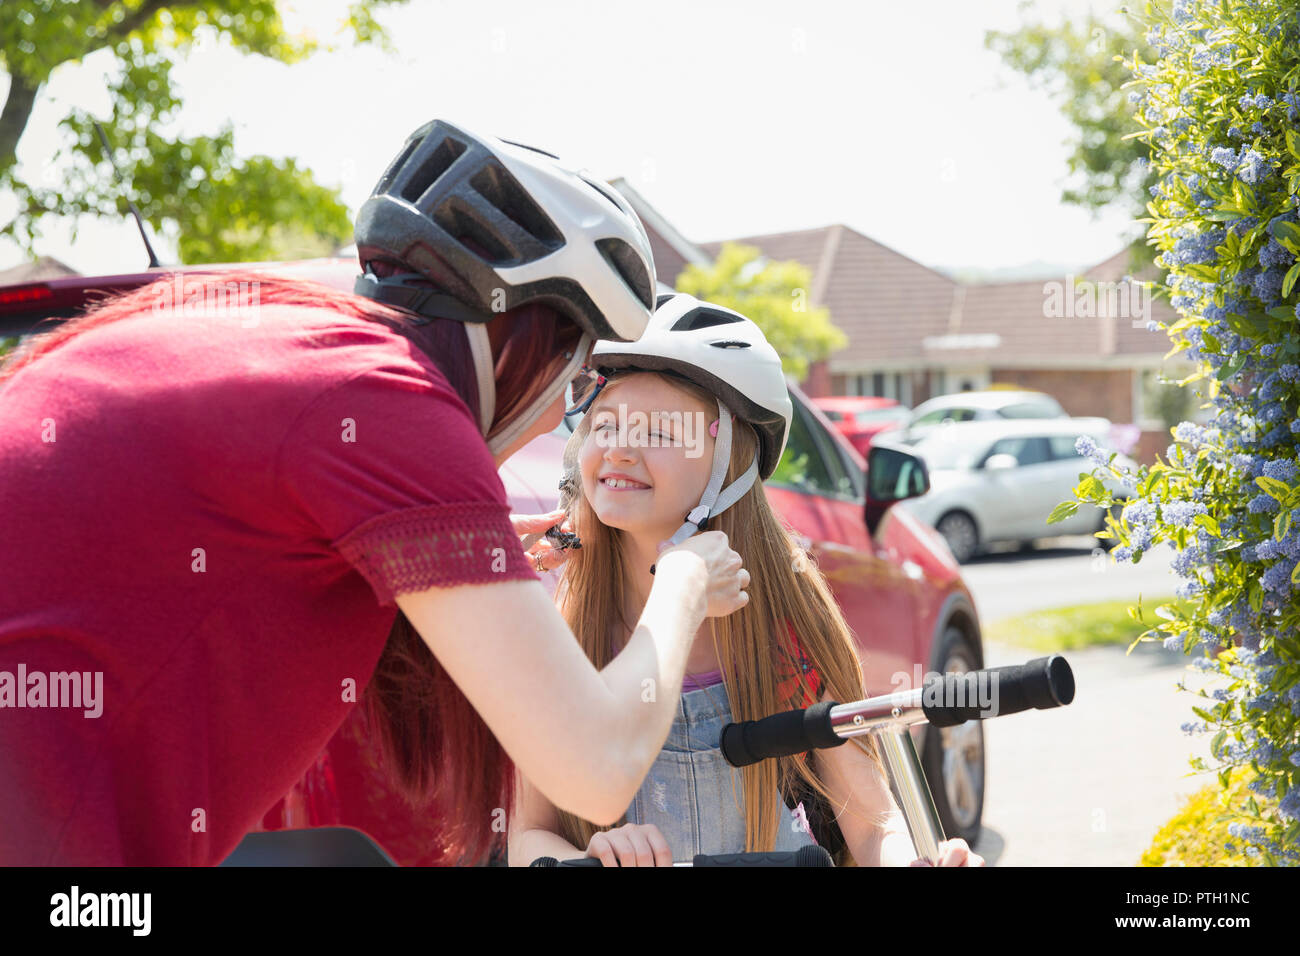 Mother fastening helmet on daughter riding scooter in sunny driveway Stock Photo